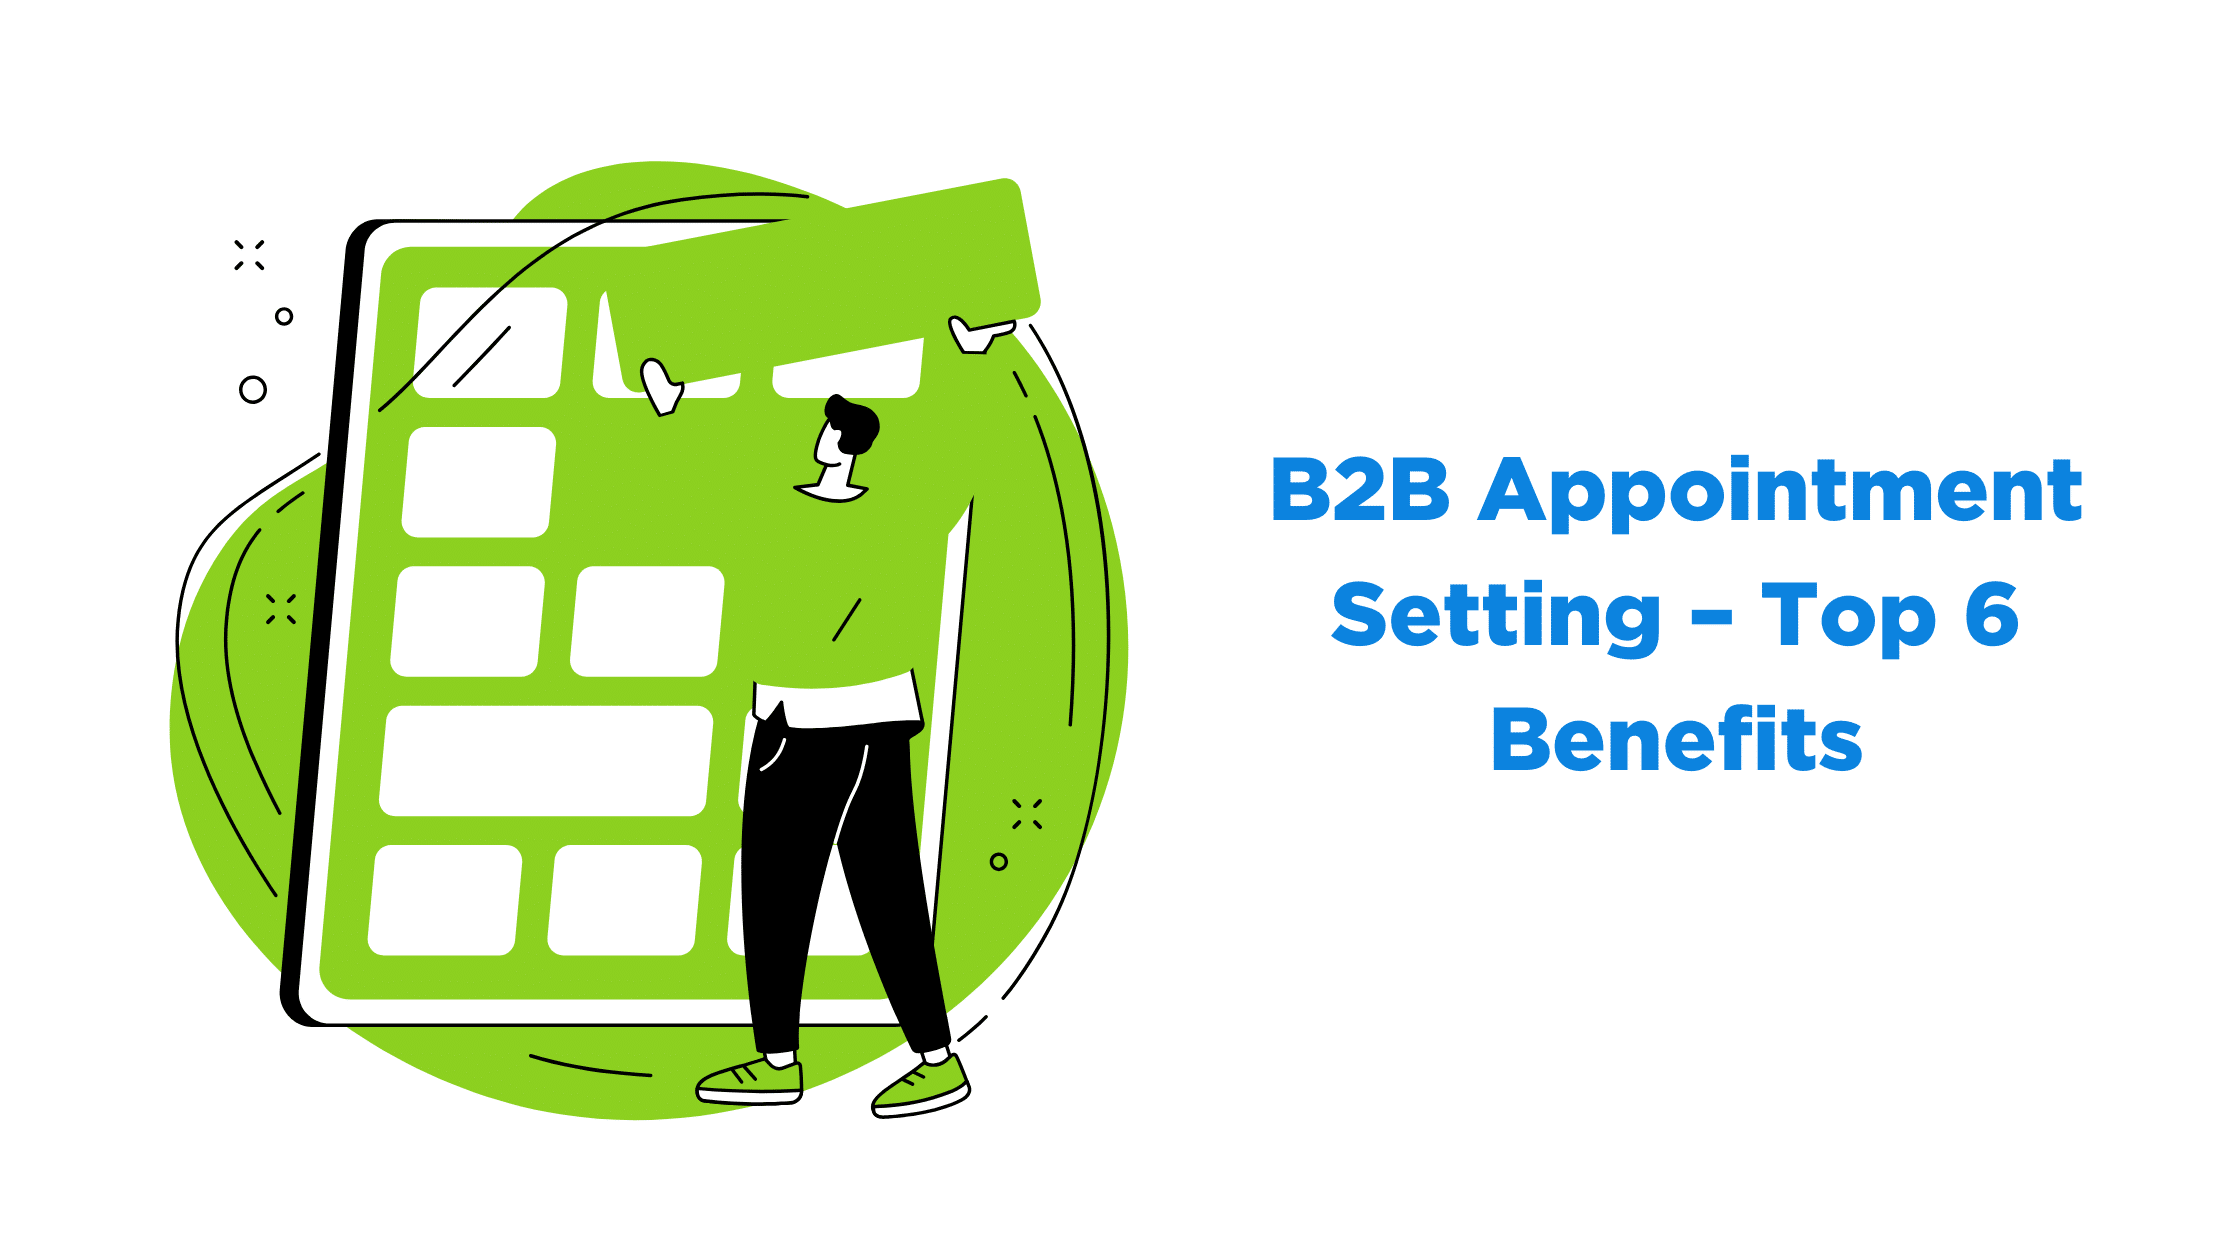 B2B Appointment Setting – Top 6 Benefits